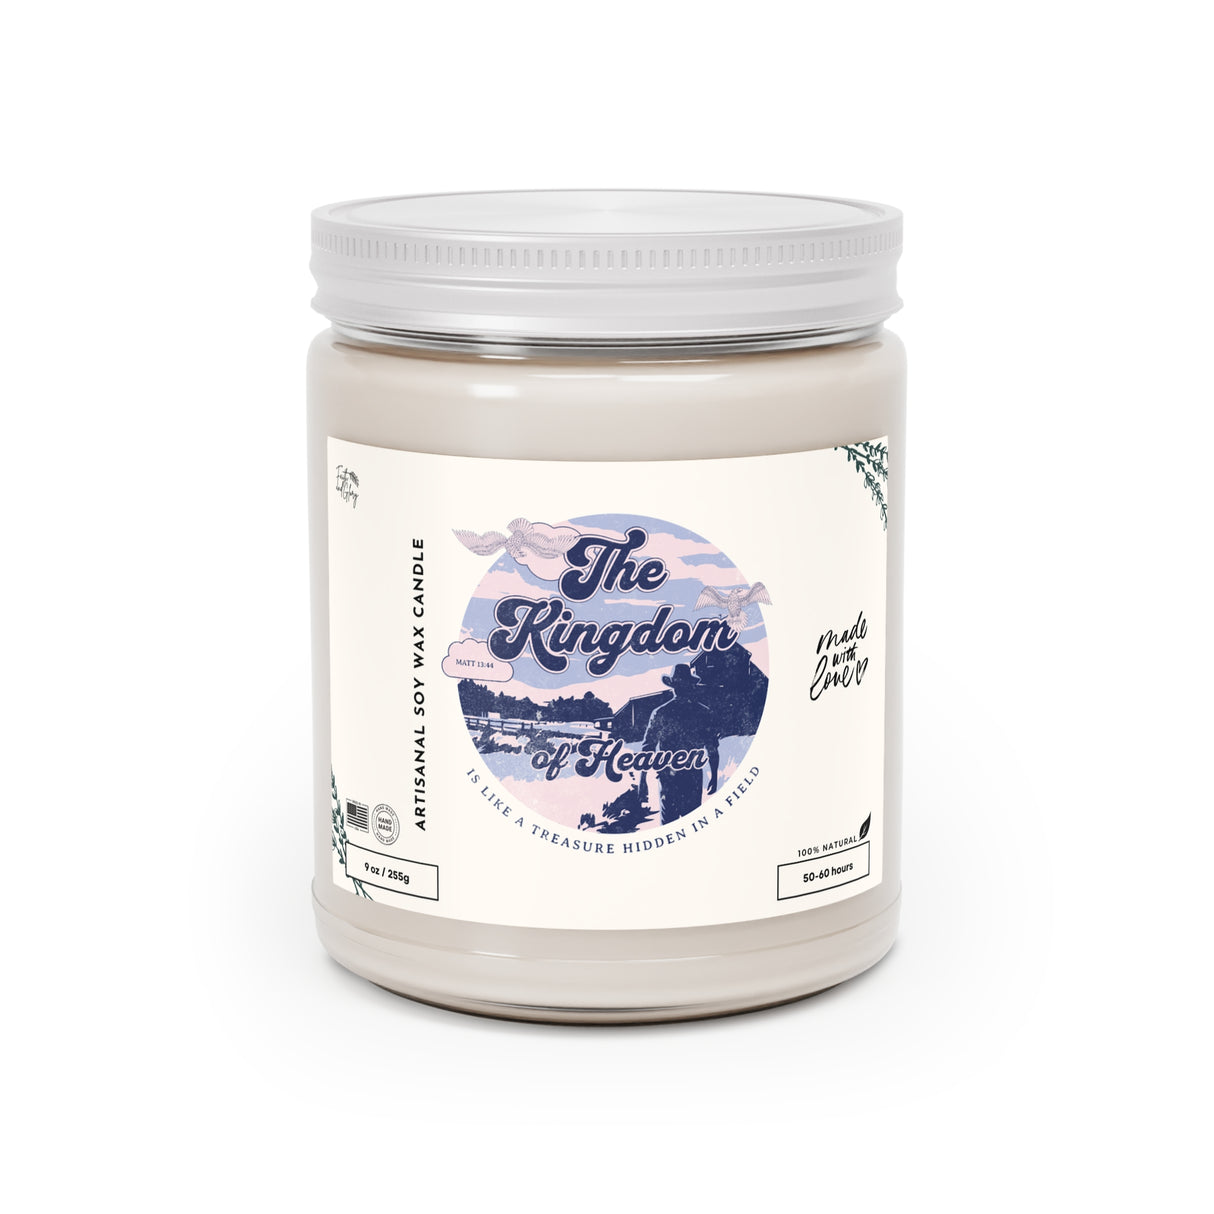 The Kingdom of Heaven Artisanal Soy Wax Candle